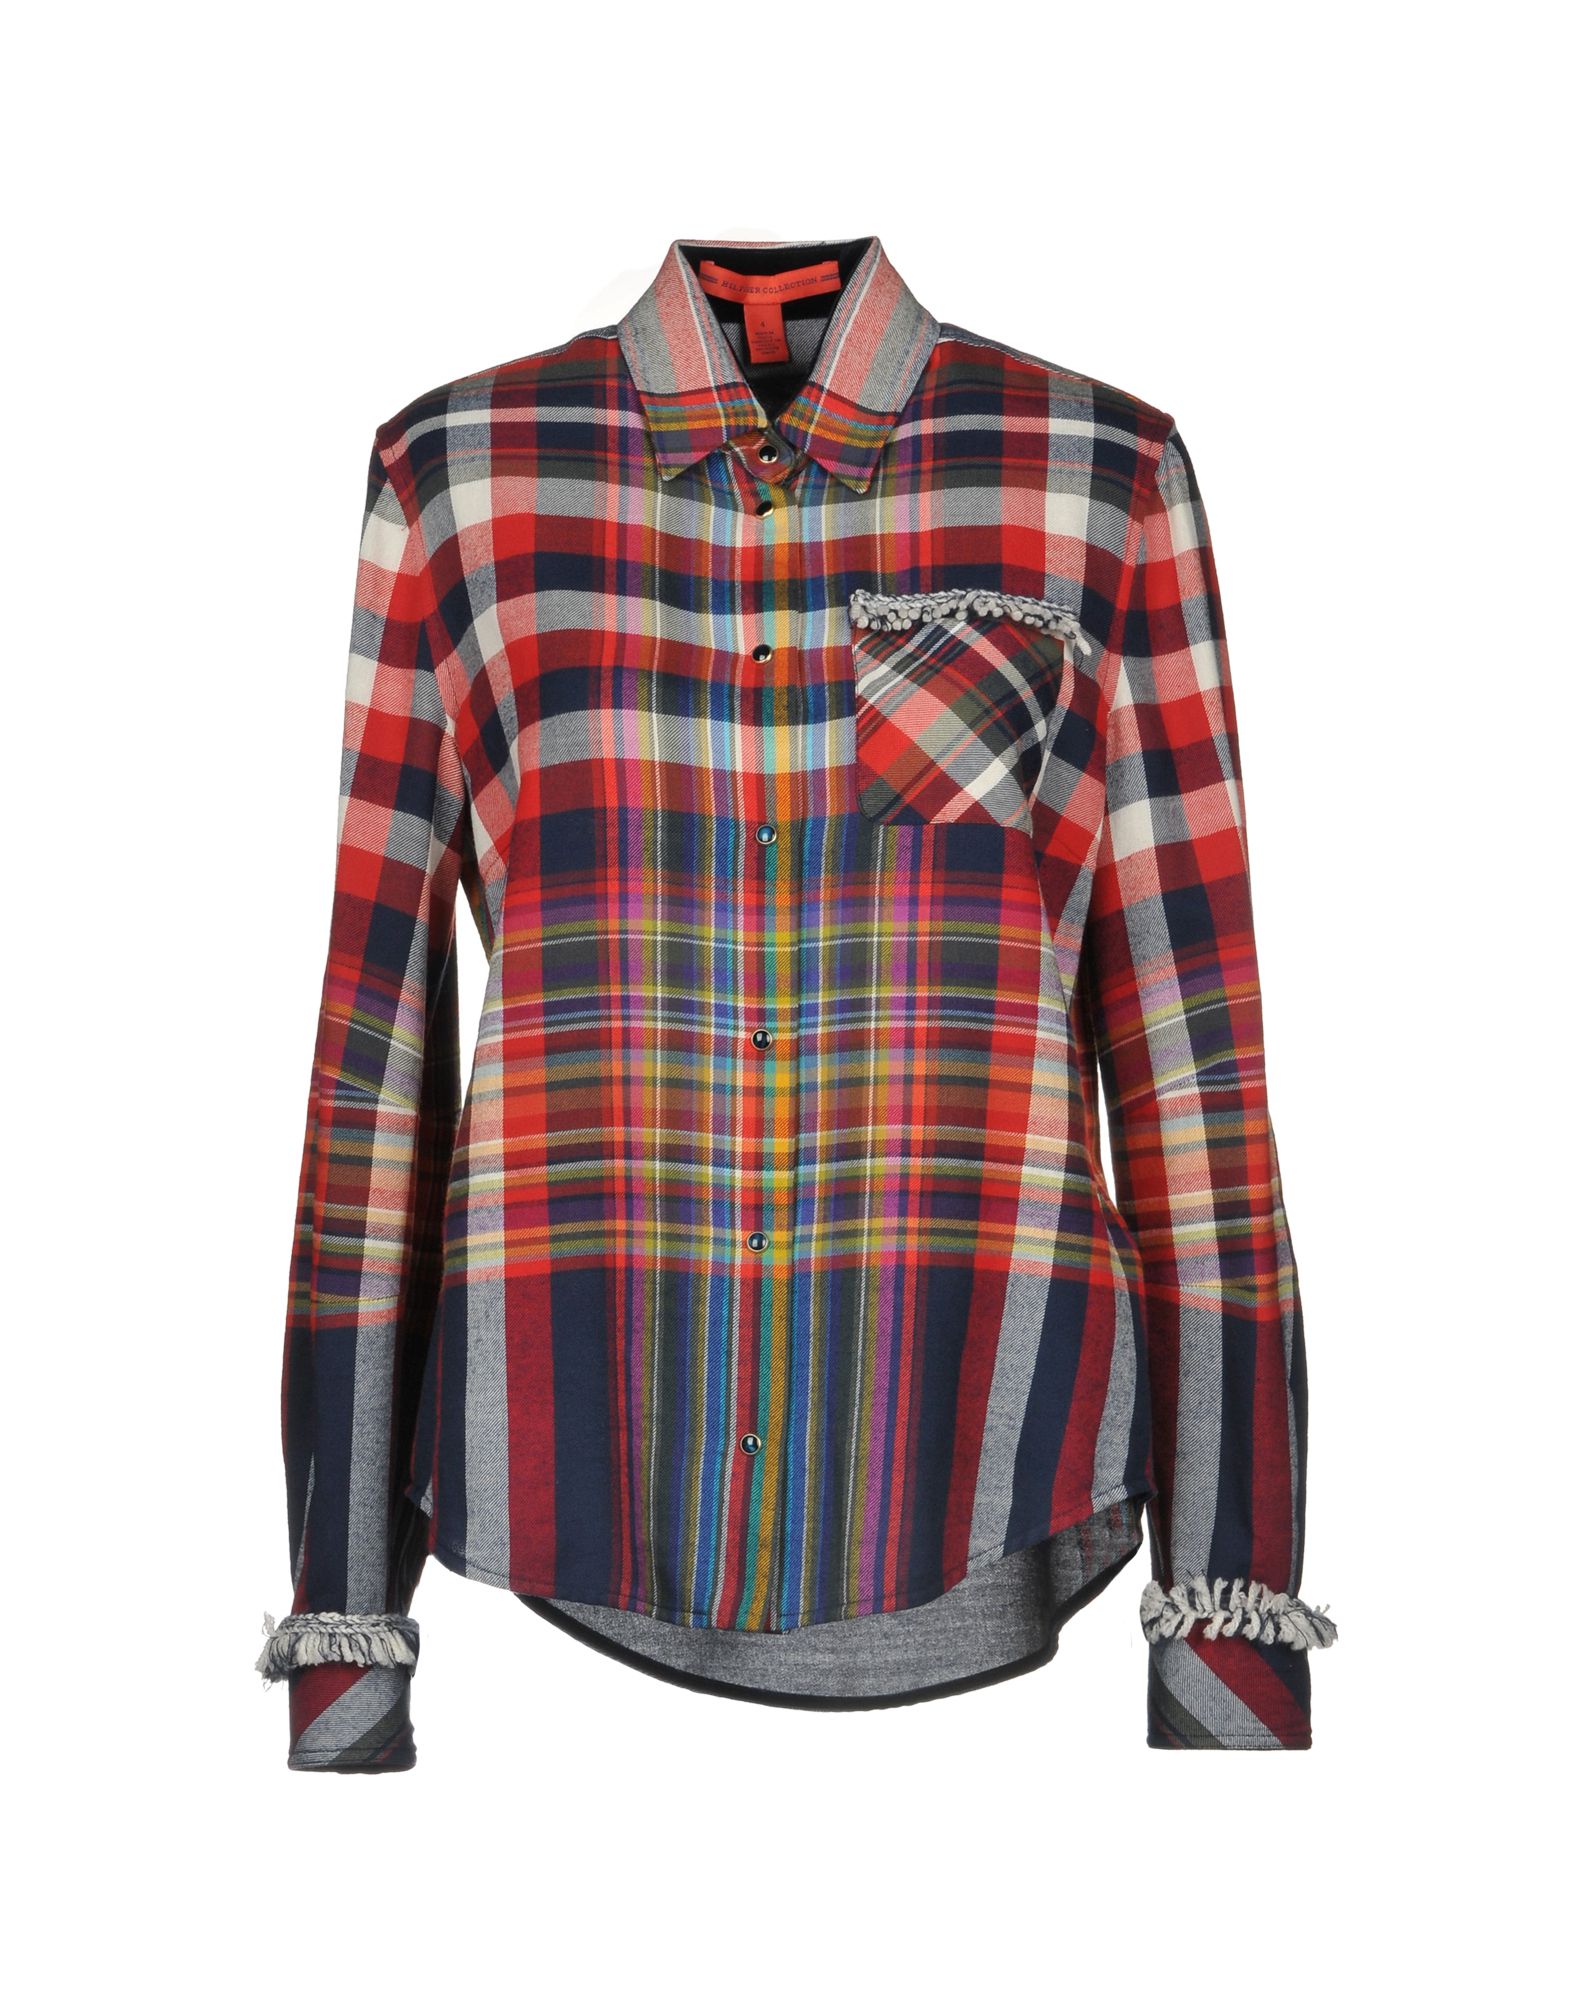 TOMMY HILFIGER Checked shirt,38764794KP 2